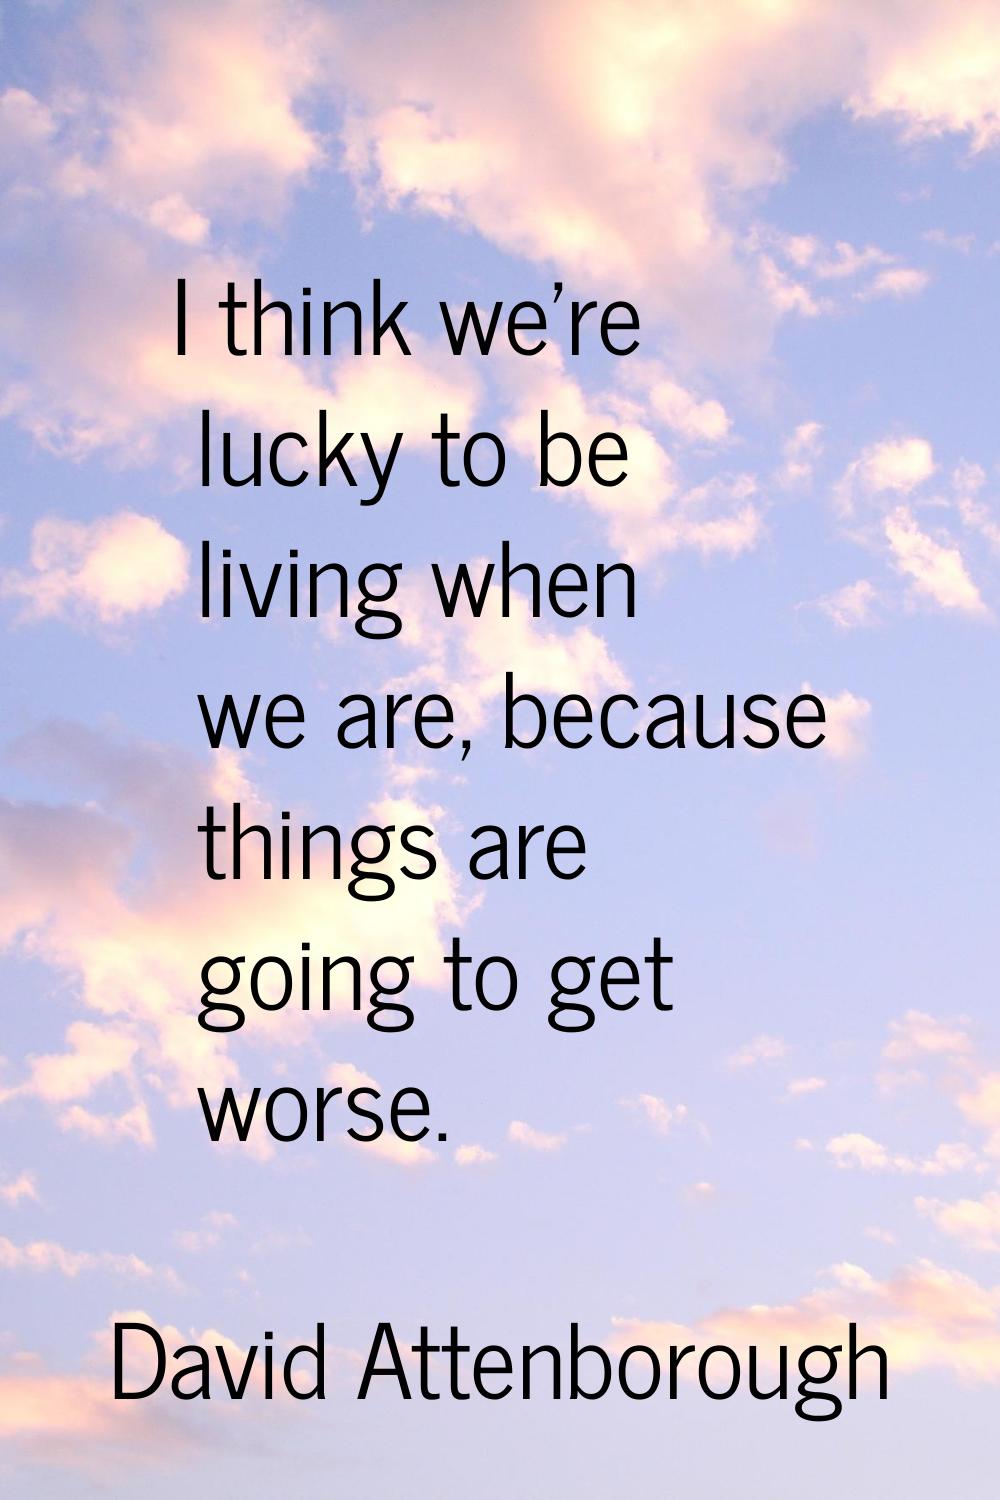 I think we're lucky to be living when we are, because things are going to get worse.